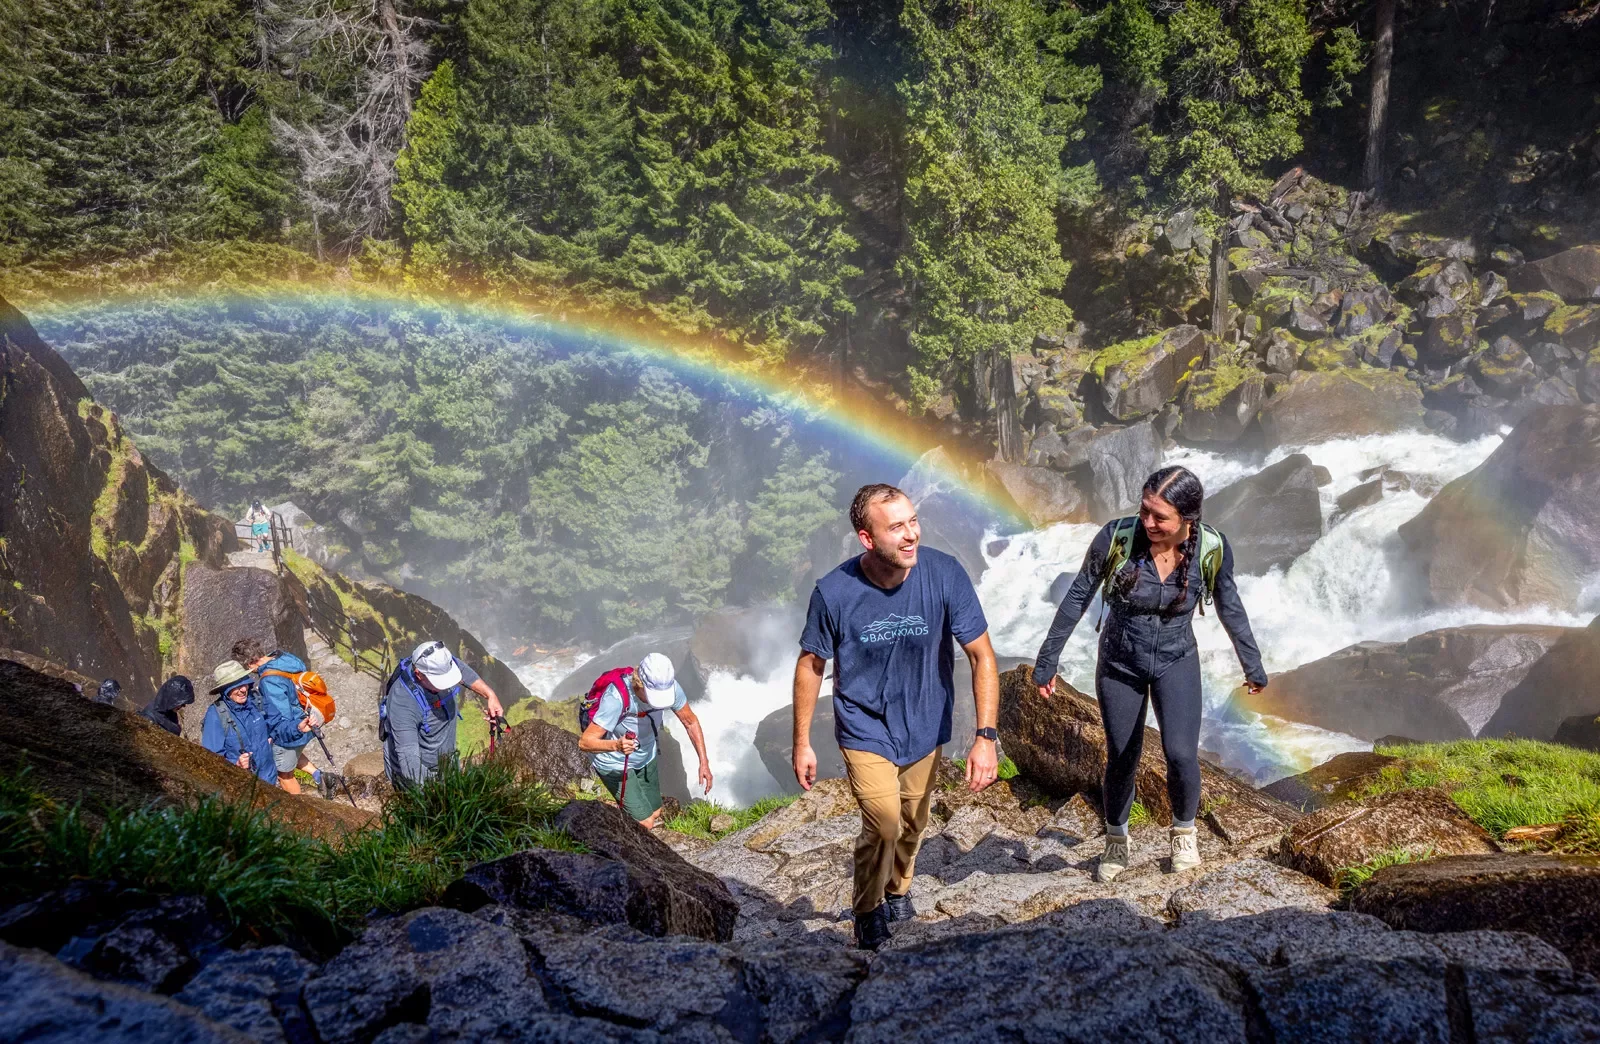 a rainbow behind a group of hikers